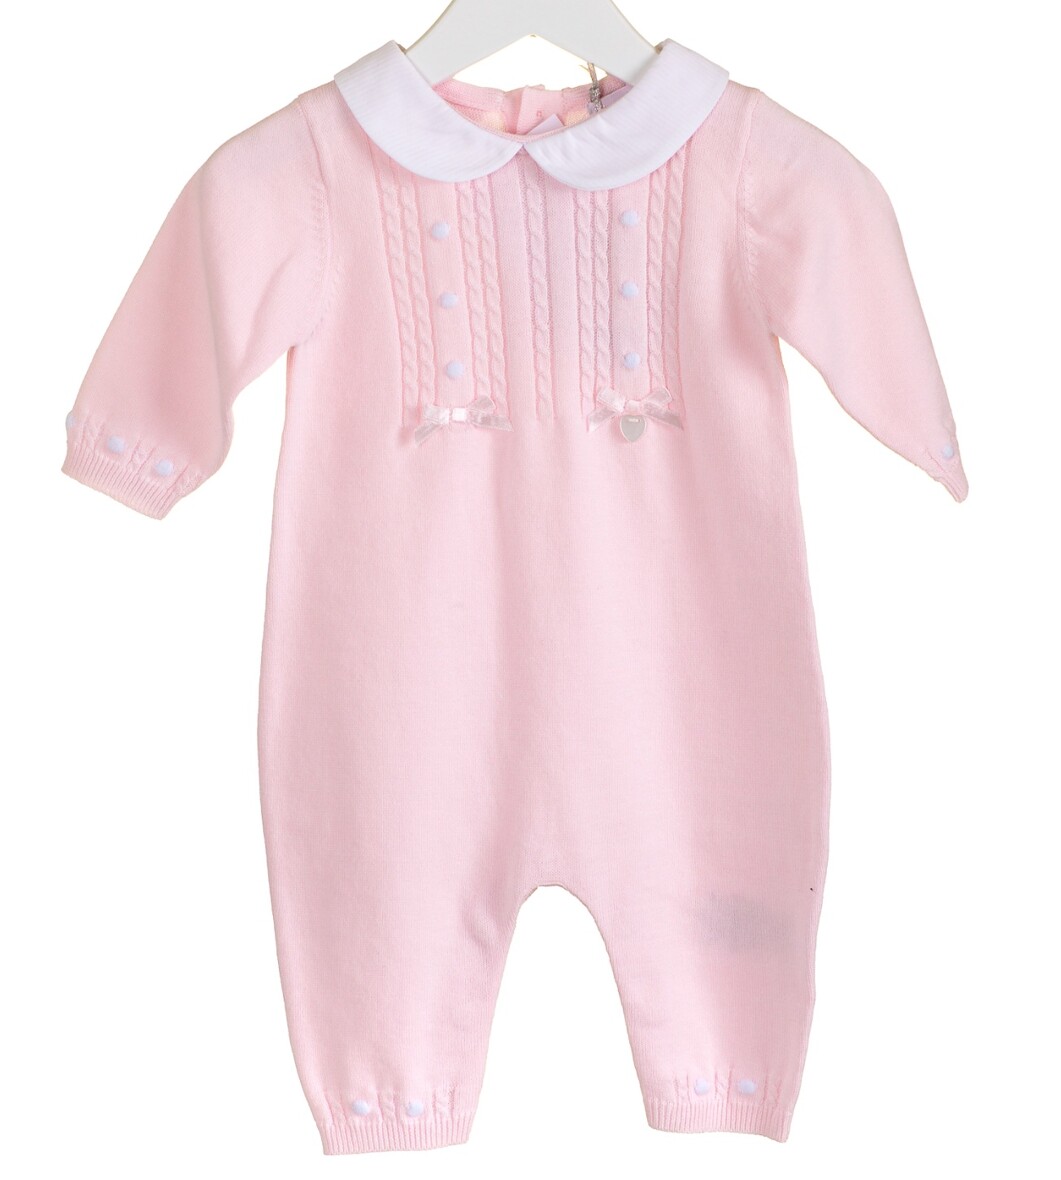 Blues Baby Peter Pan collar Knitted Romper in Pink